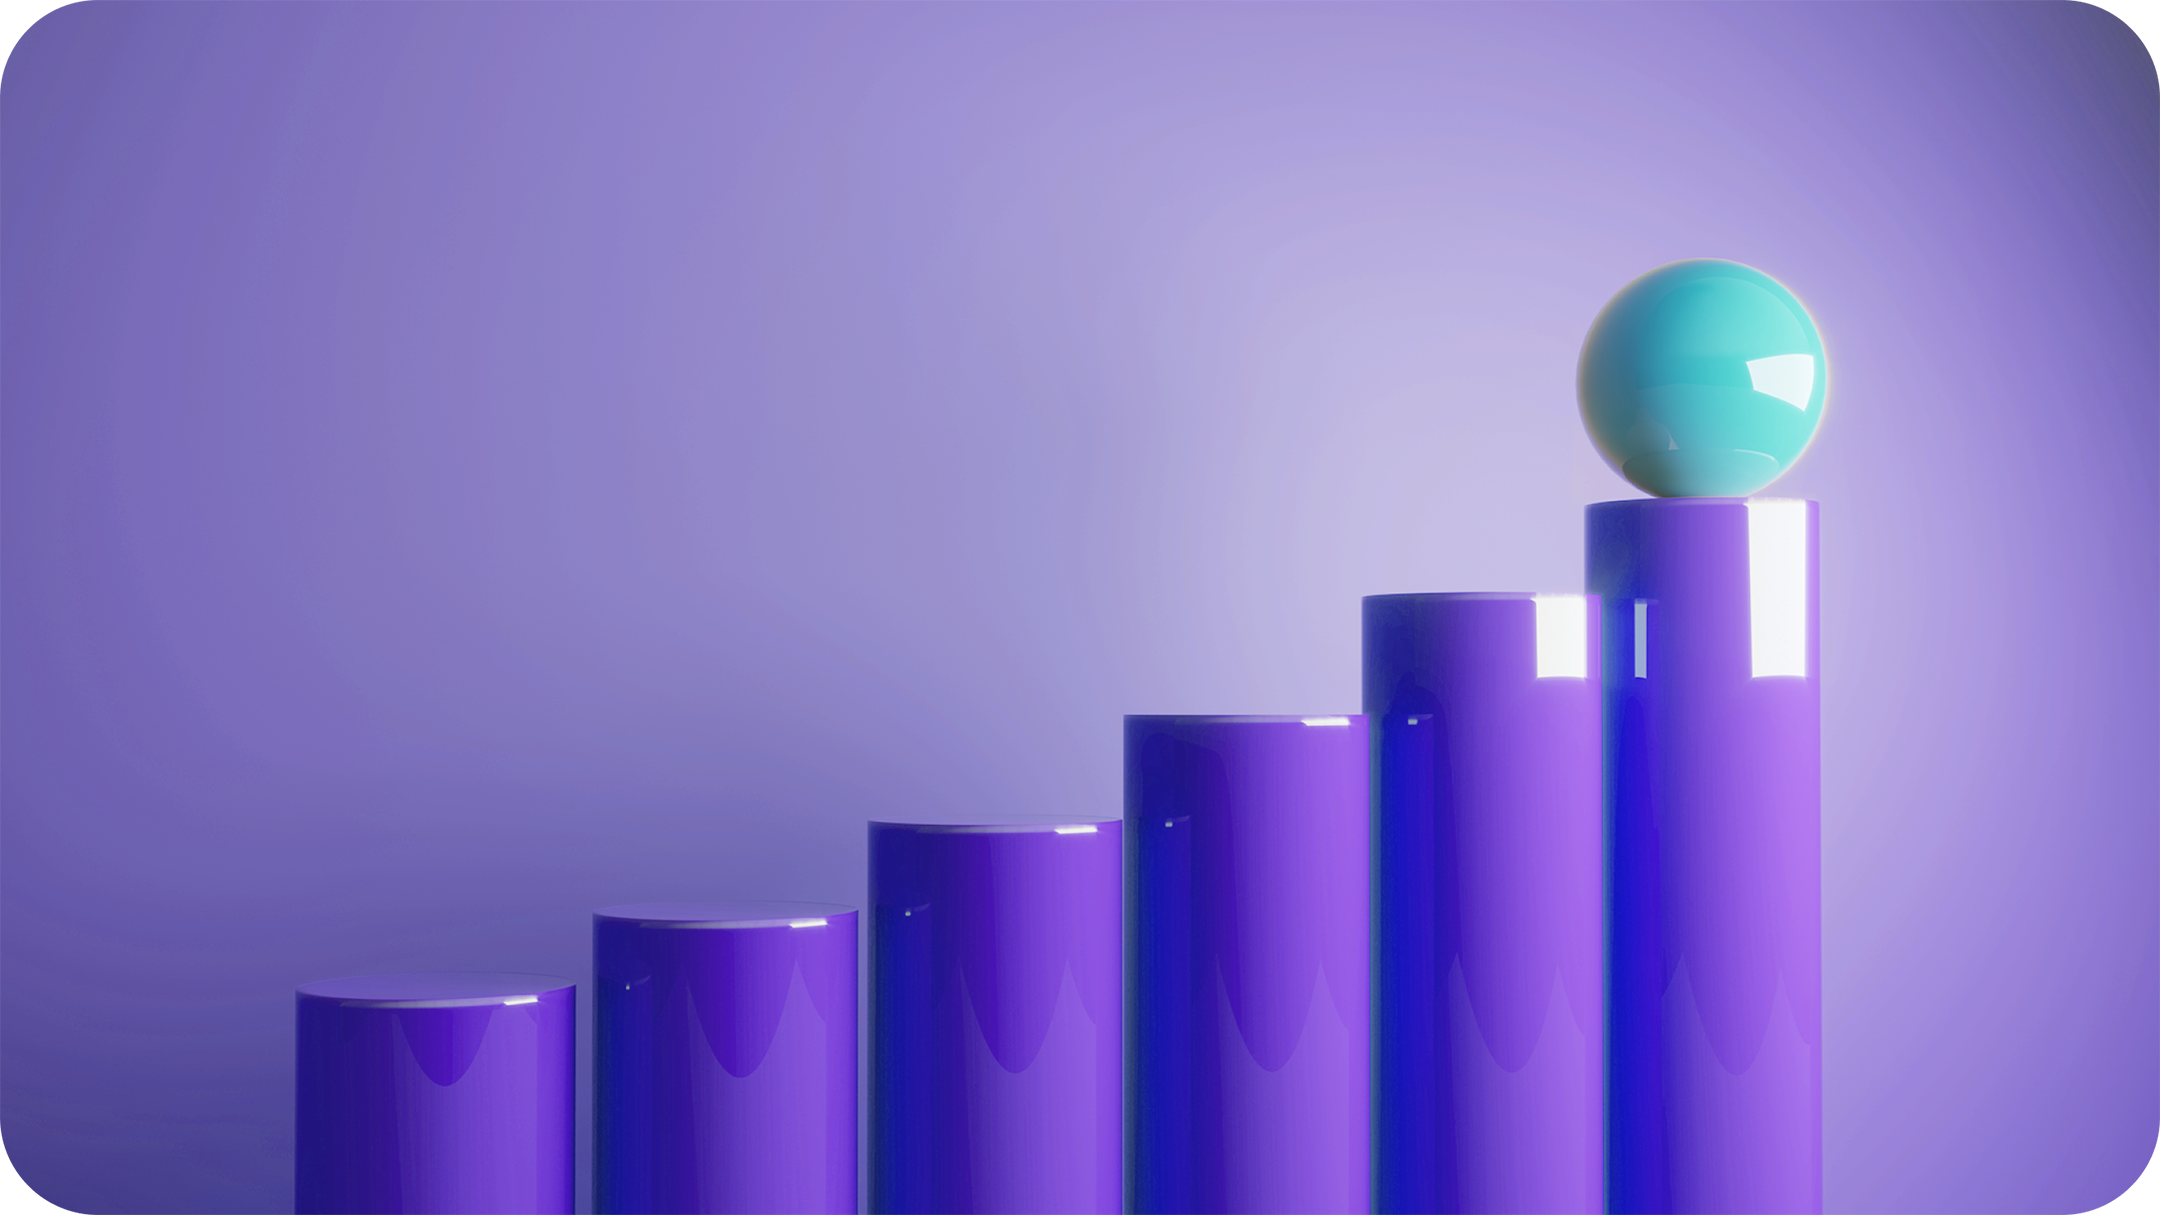 A purple bar graph made of cylindrical bars is illustrated with a blue marble on the highest bar to the right.